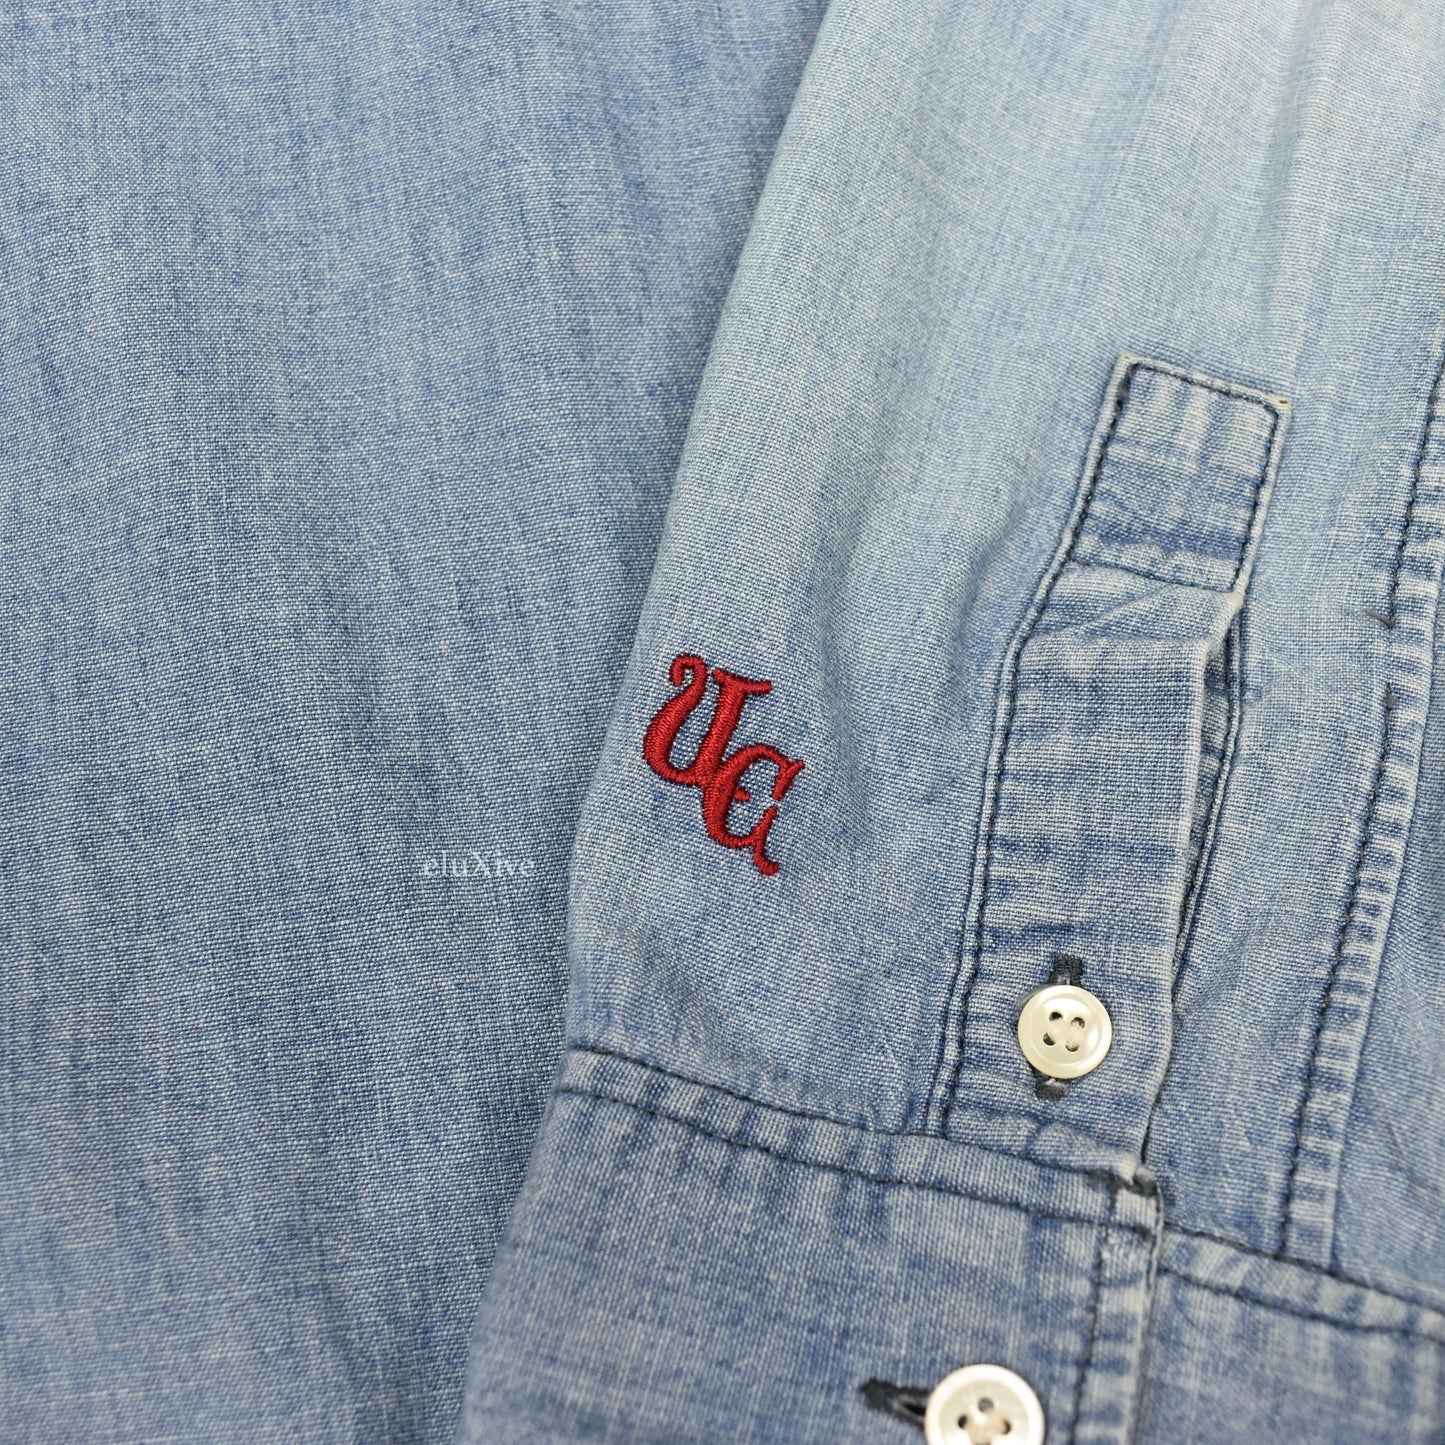 Undercover - AW11 'Mirror' Logo Embroidered Western Chambray Shirt